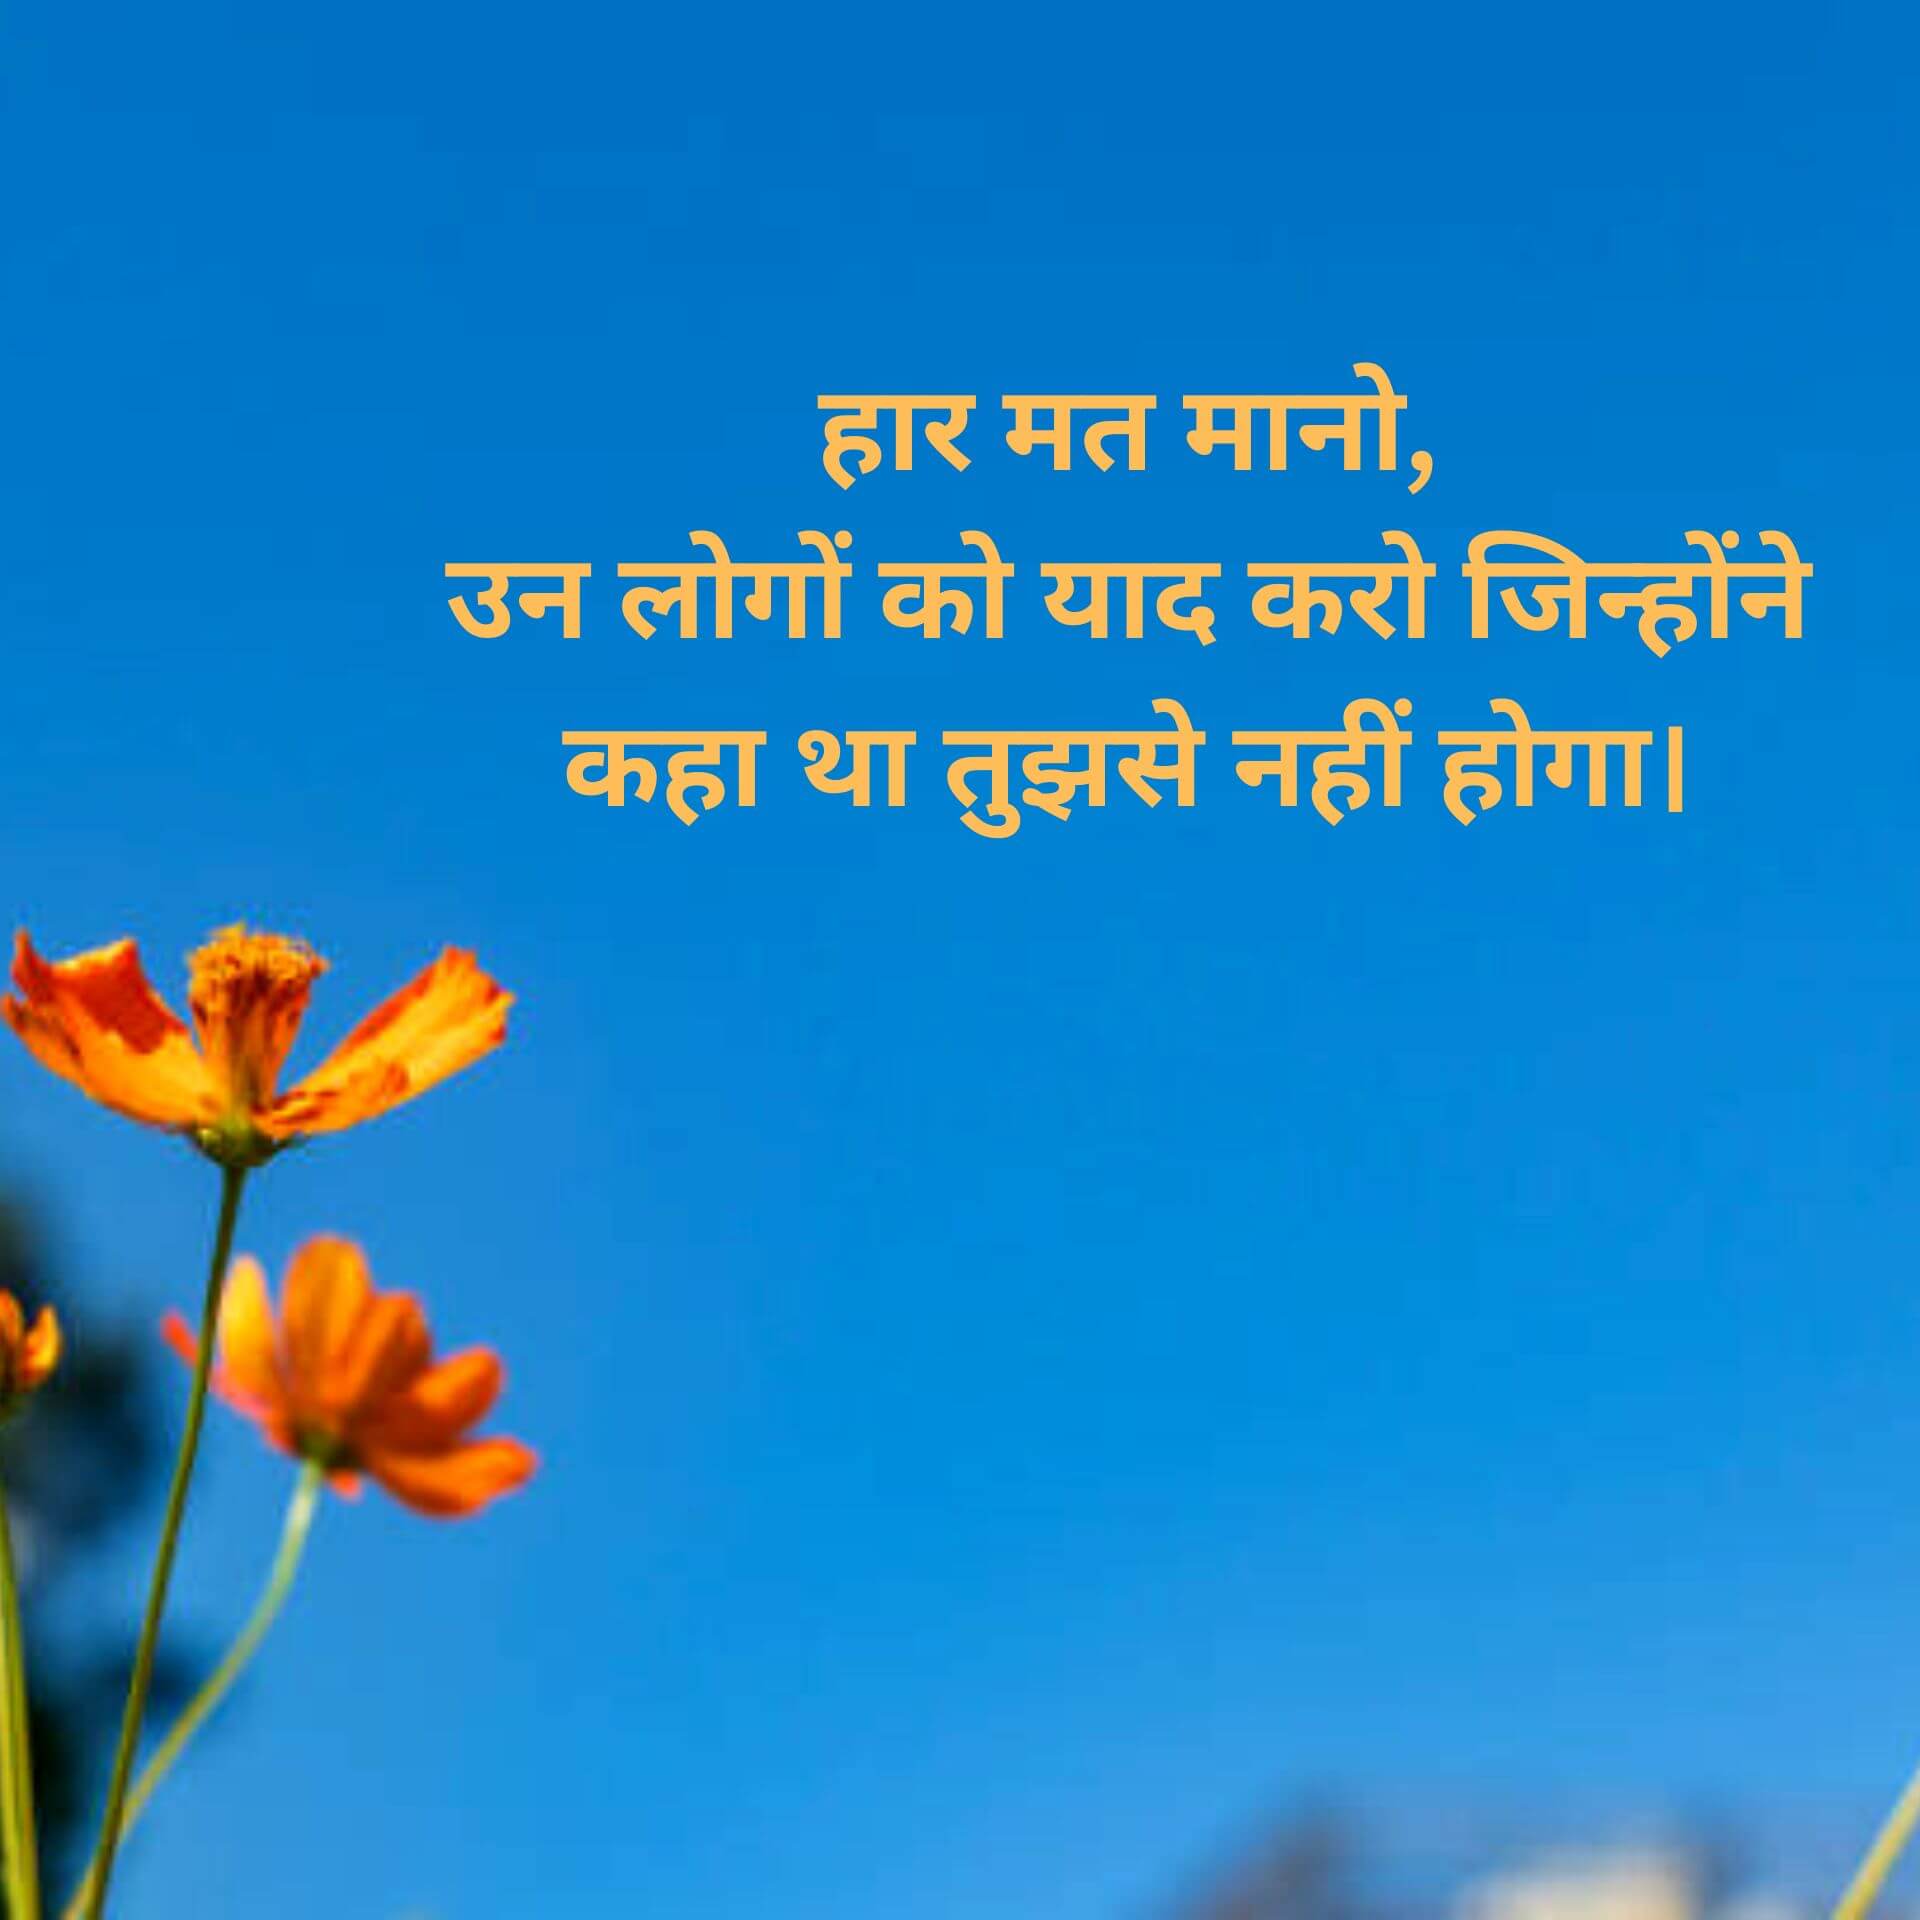 Free Hindi Motivational Quotes Wallpaper Pics Download for Whatsapp